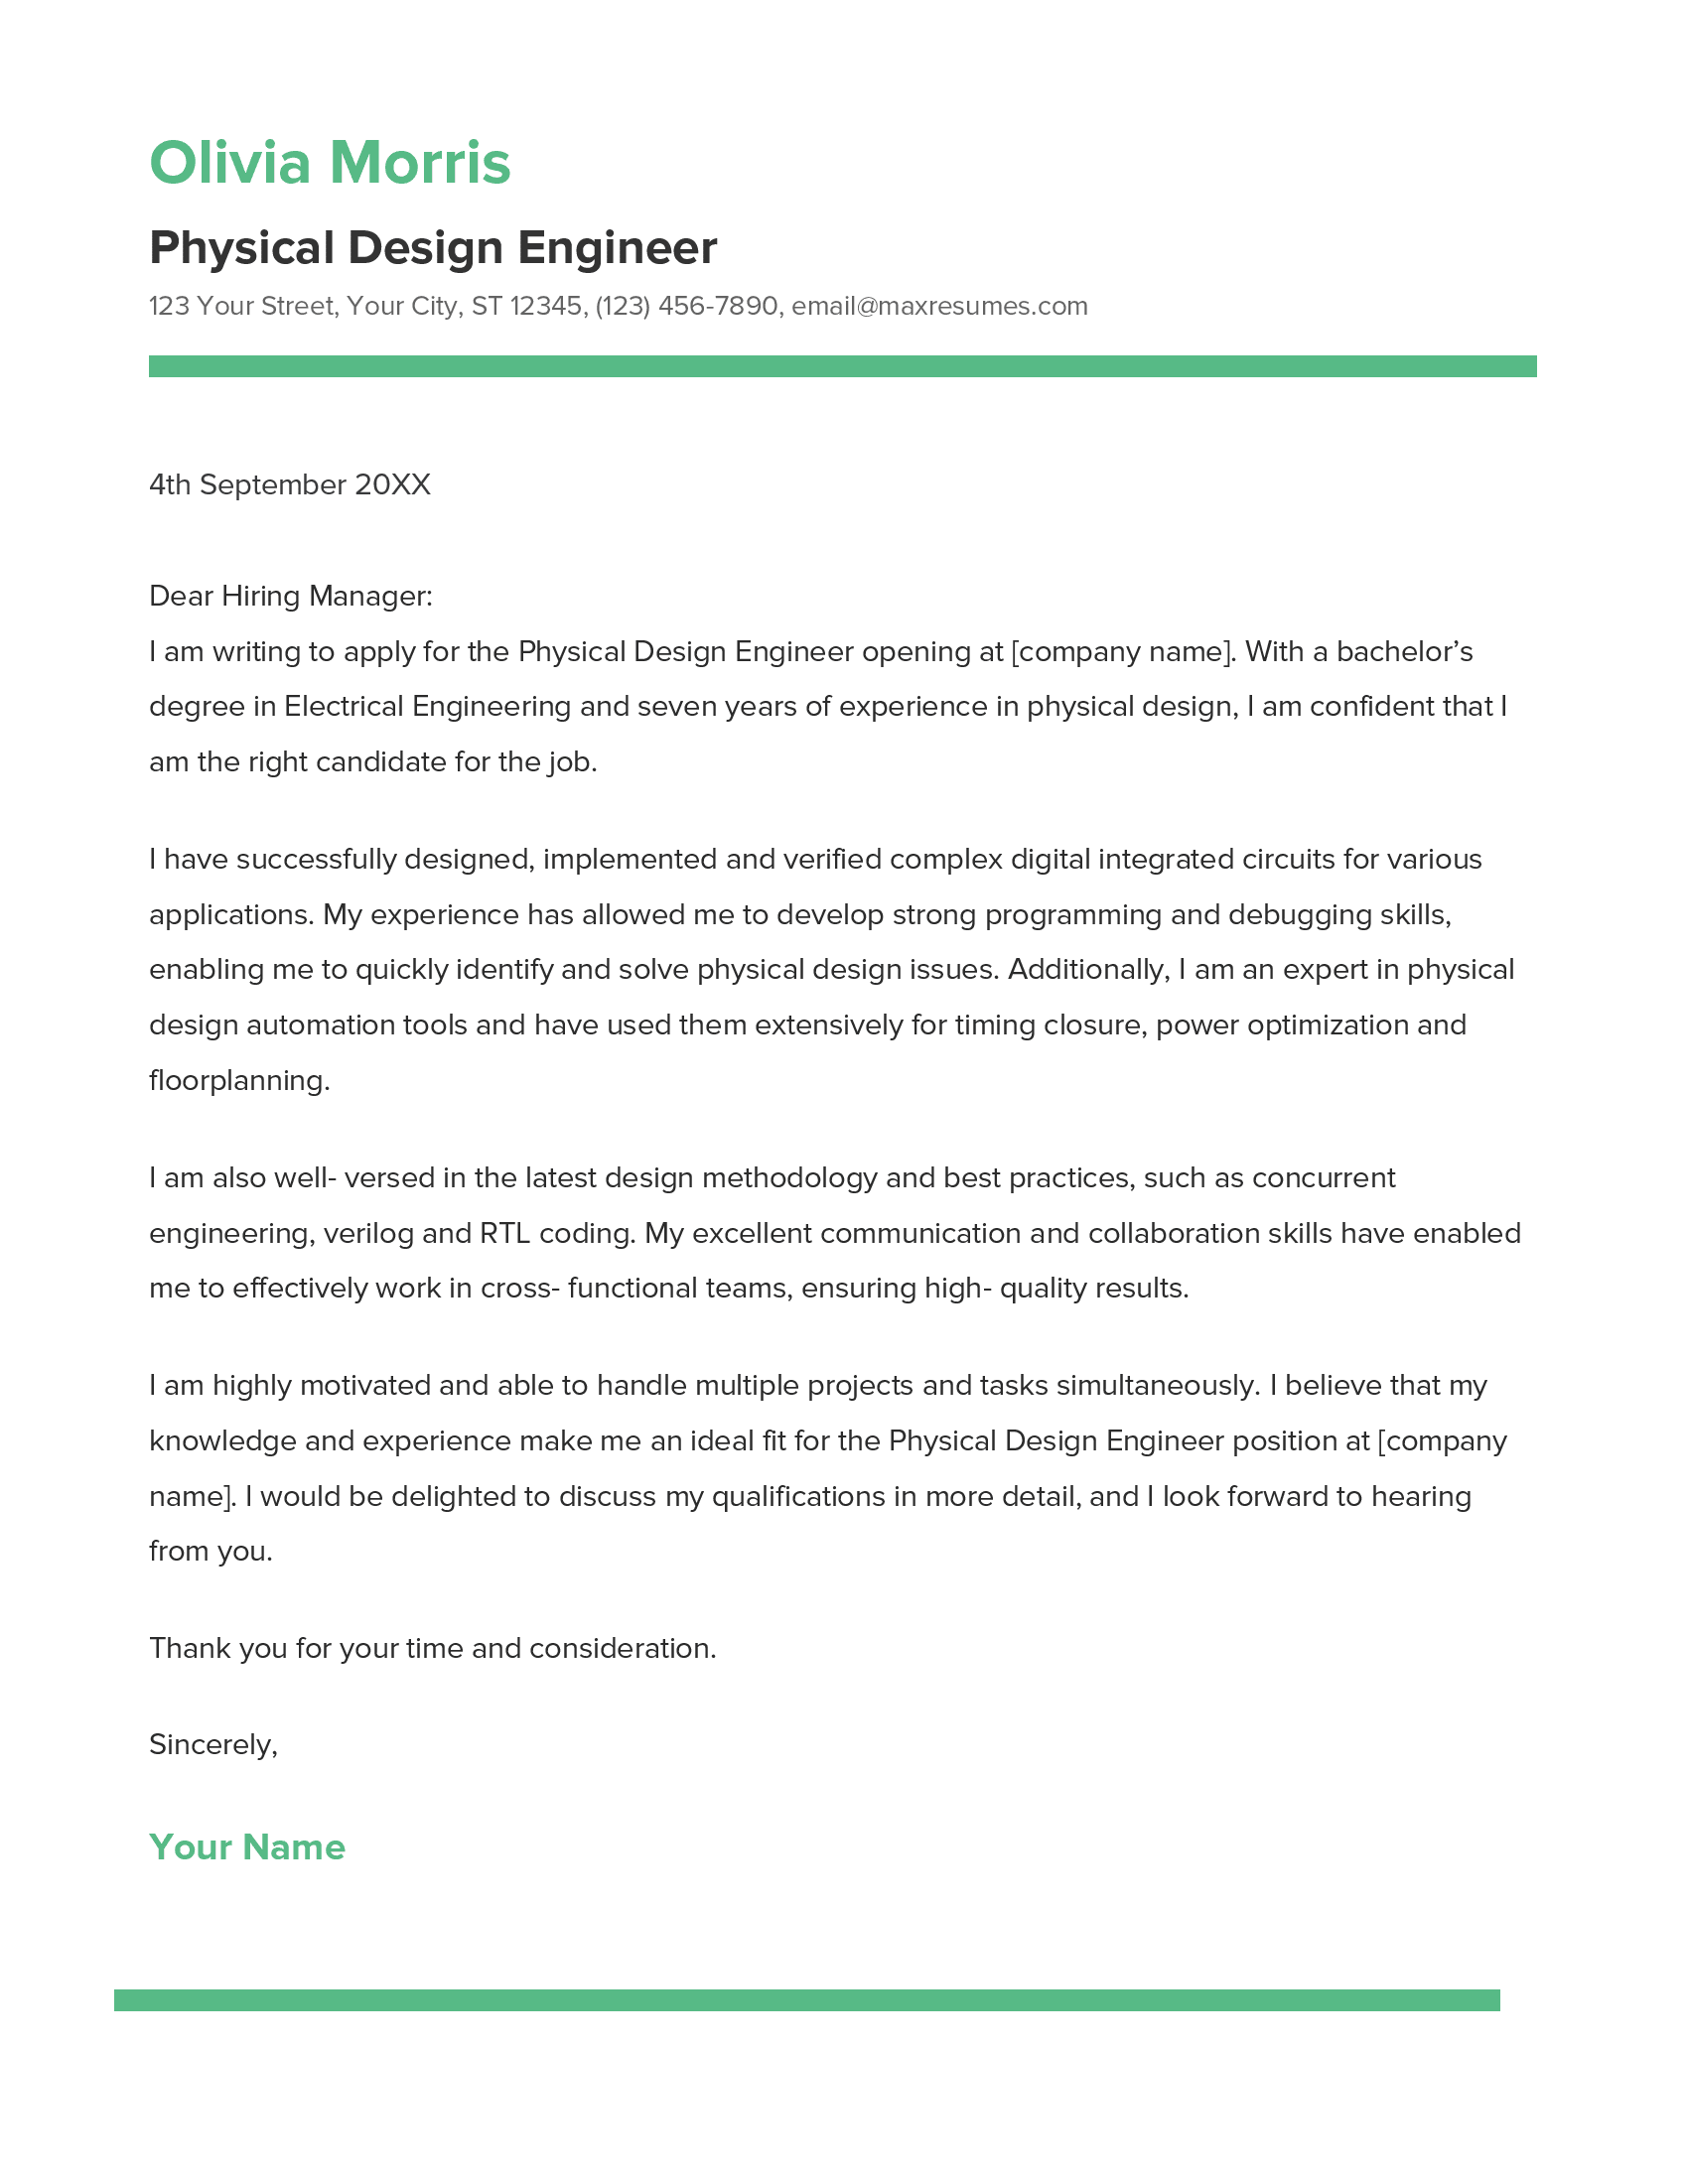 Physical Design Engineer Cover Letter Example